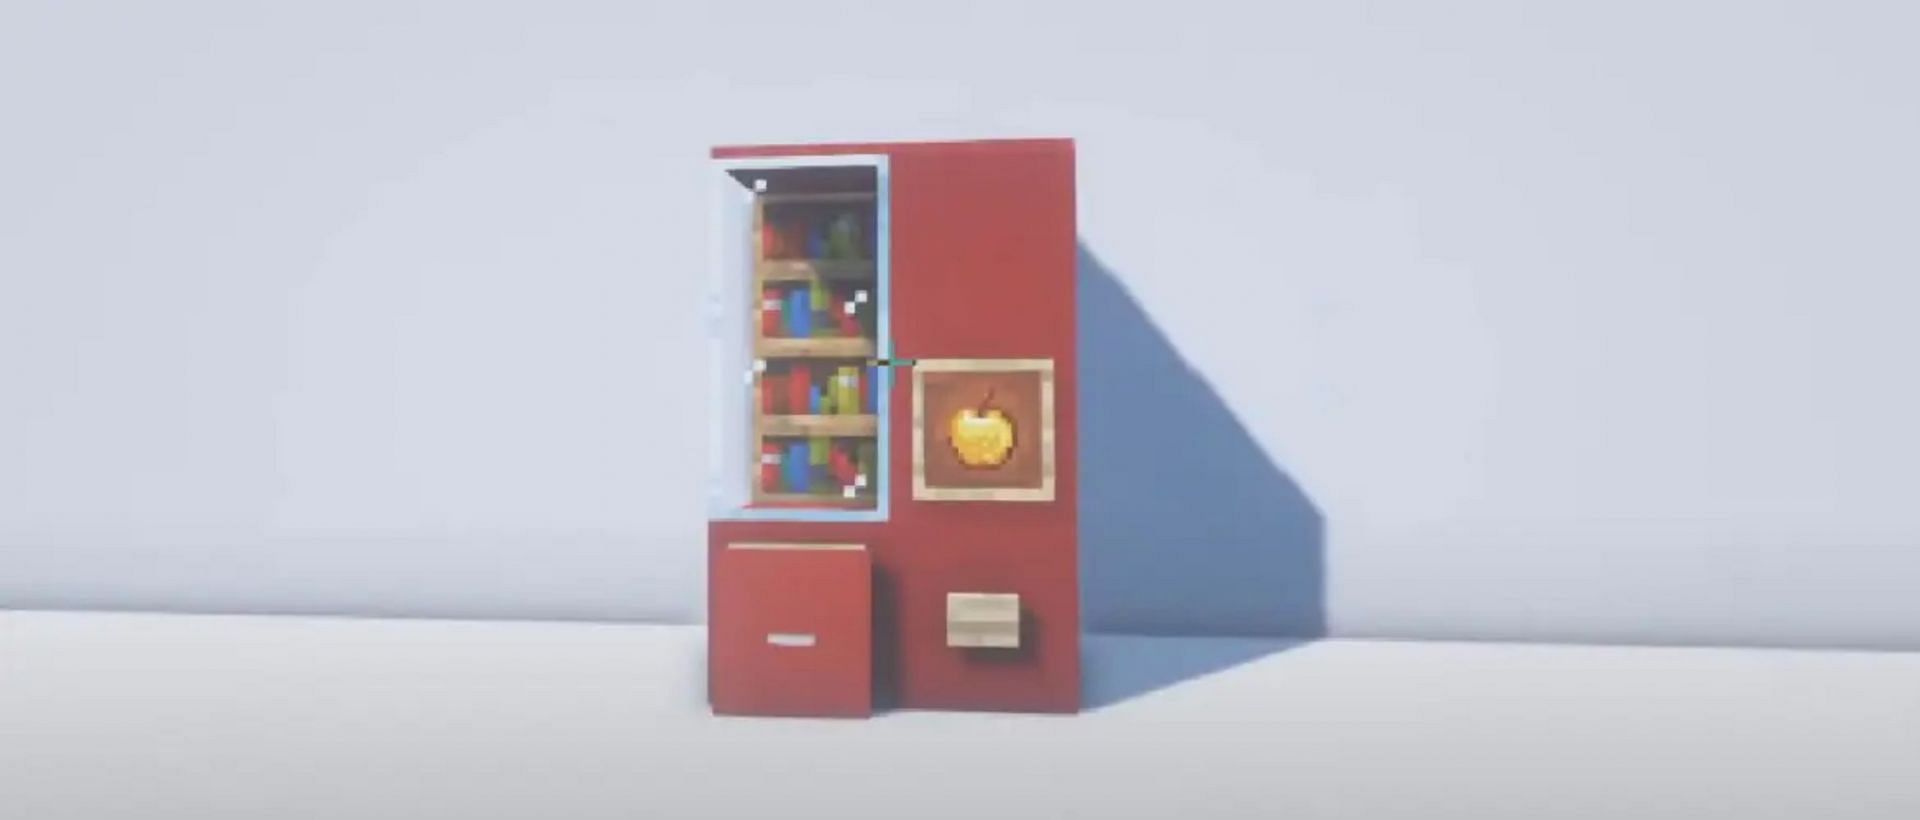 Vending machines allow for quick and accessible items (Image via Mojang)